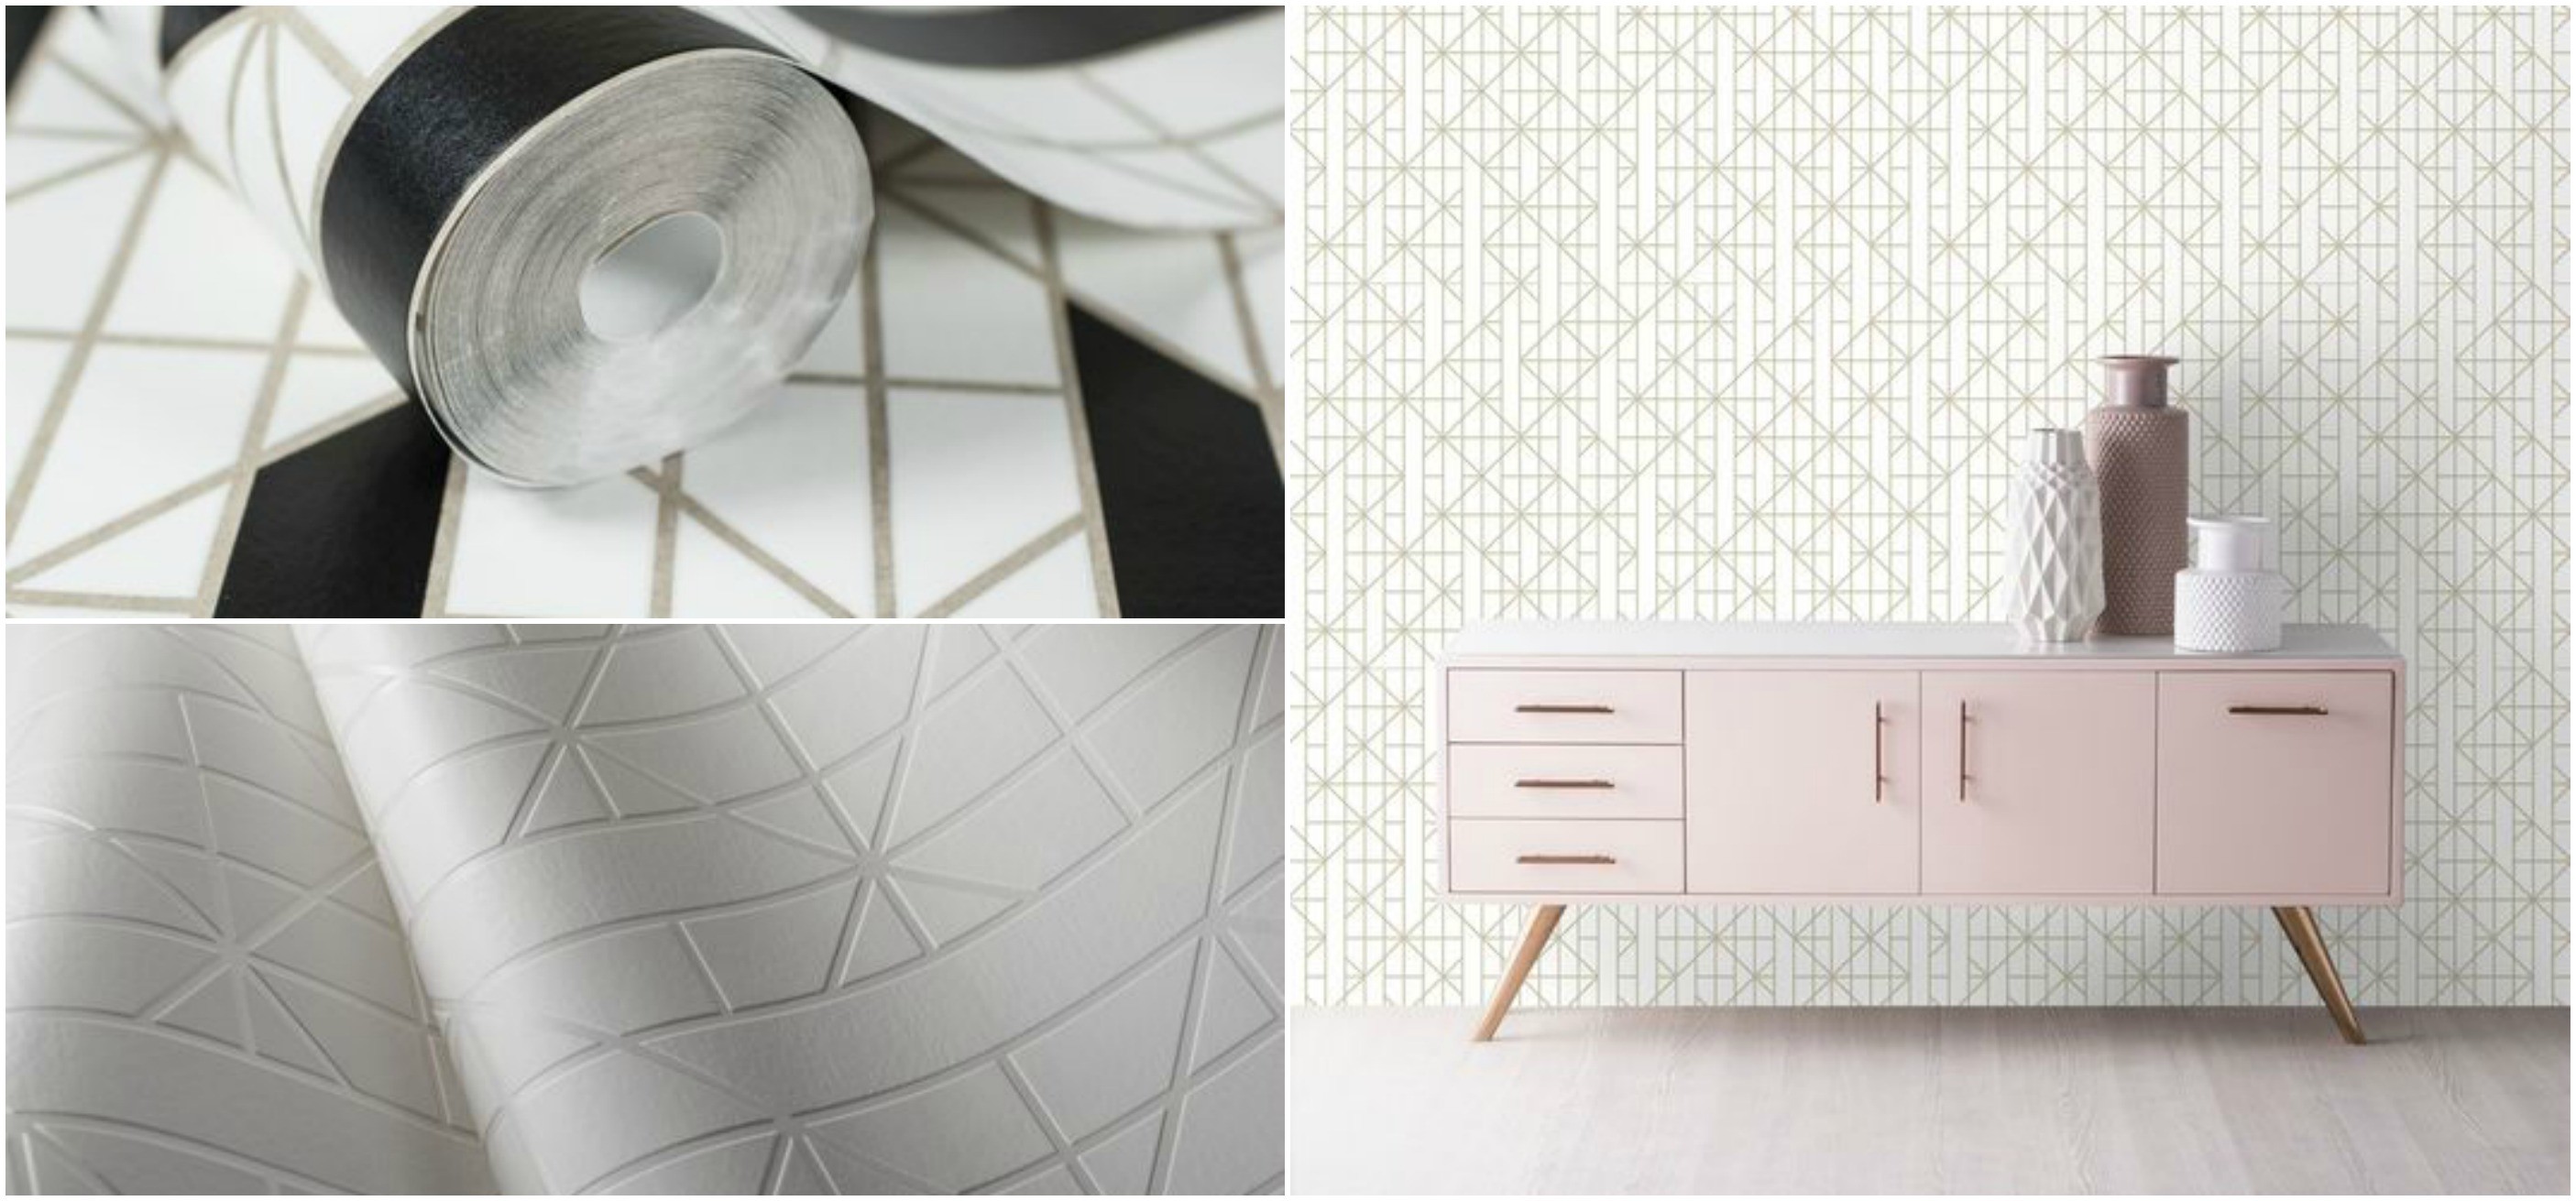 2811x1311 These geometric designs are the perfect starting point when updating your  home and we love how the metallic geometric designs contrasts with the  matte ...